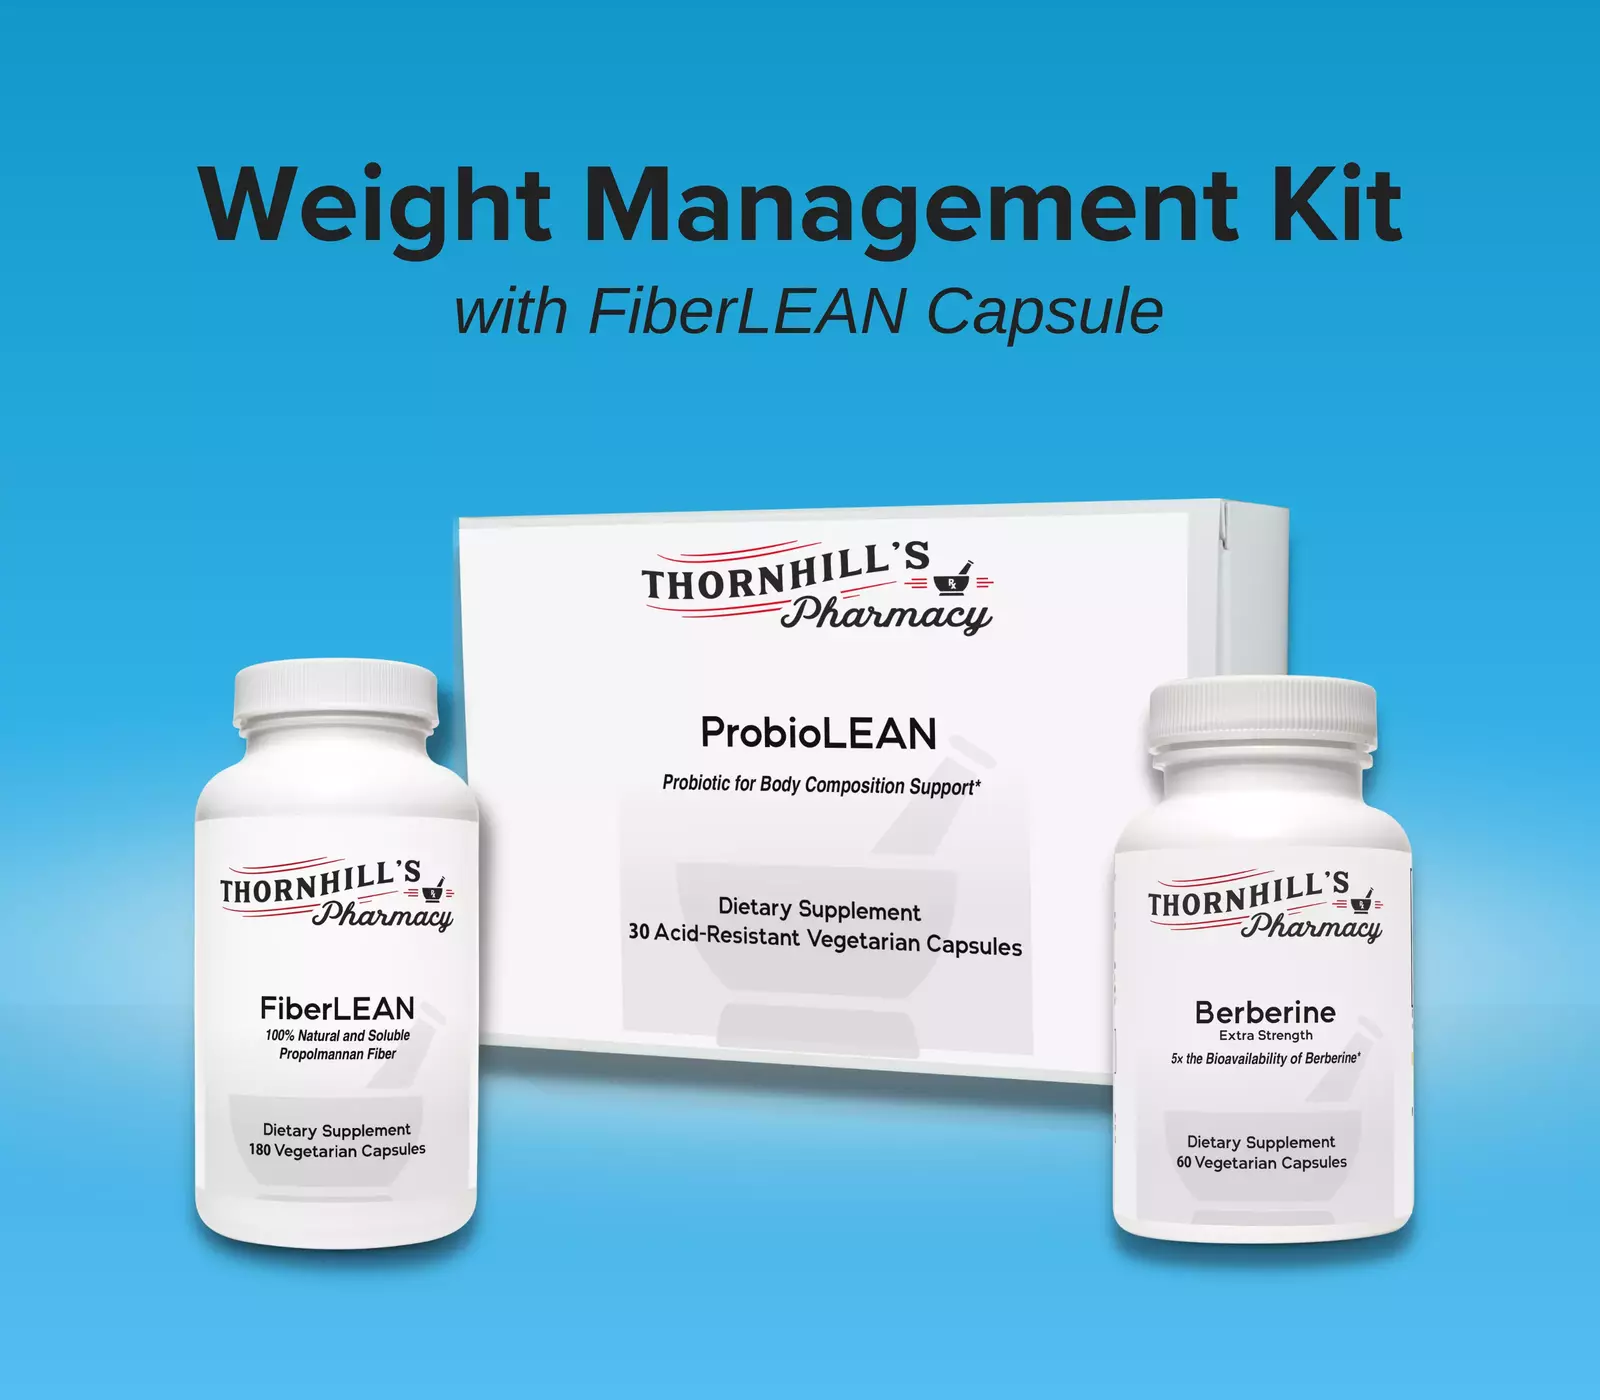 Weight Management Kit with FiberLEAN Capsule